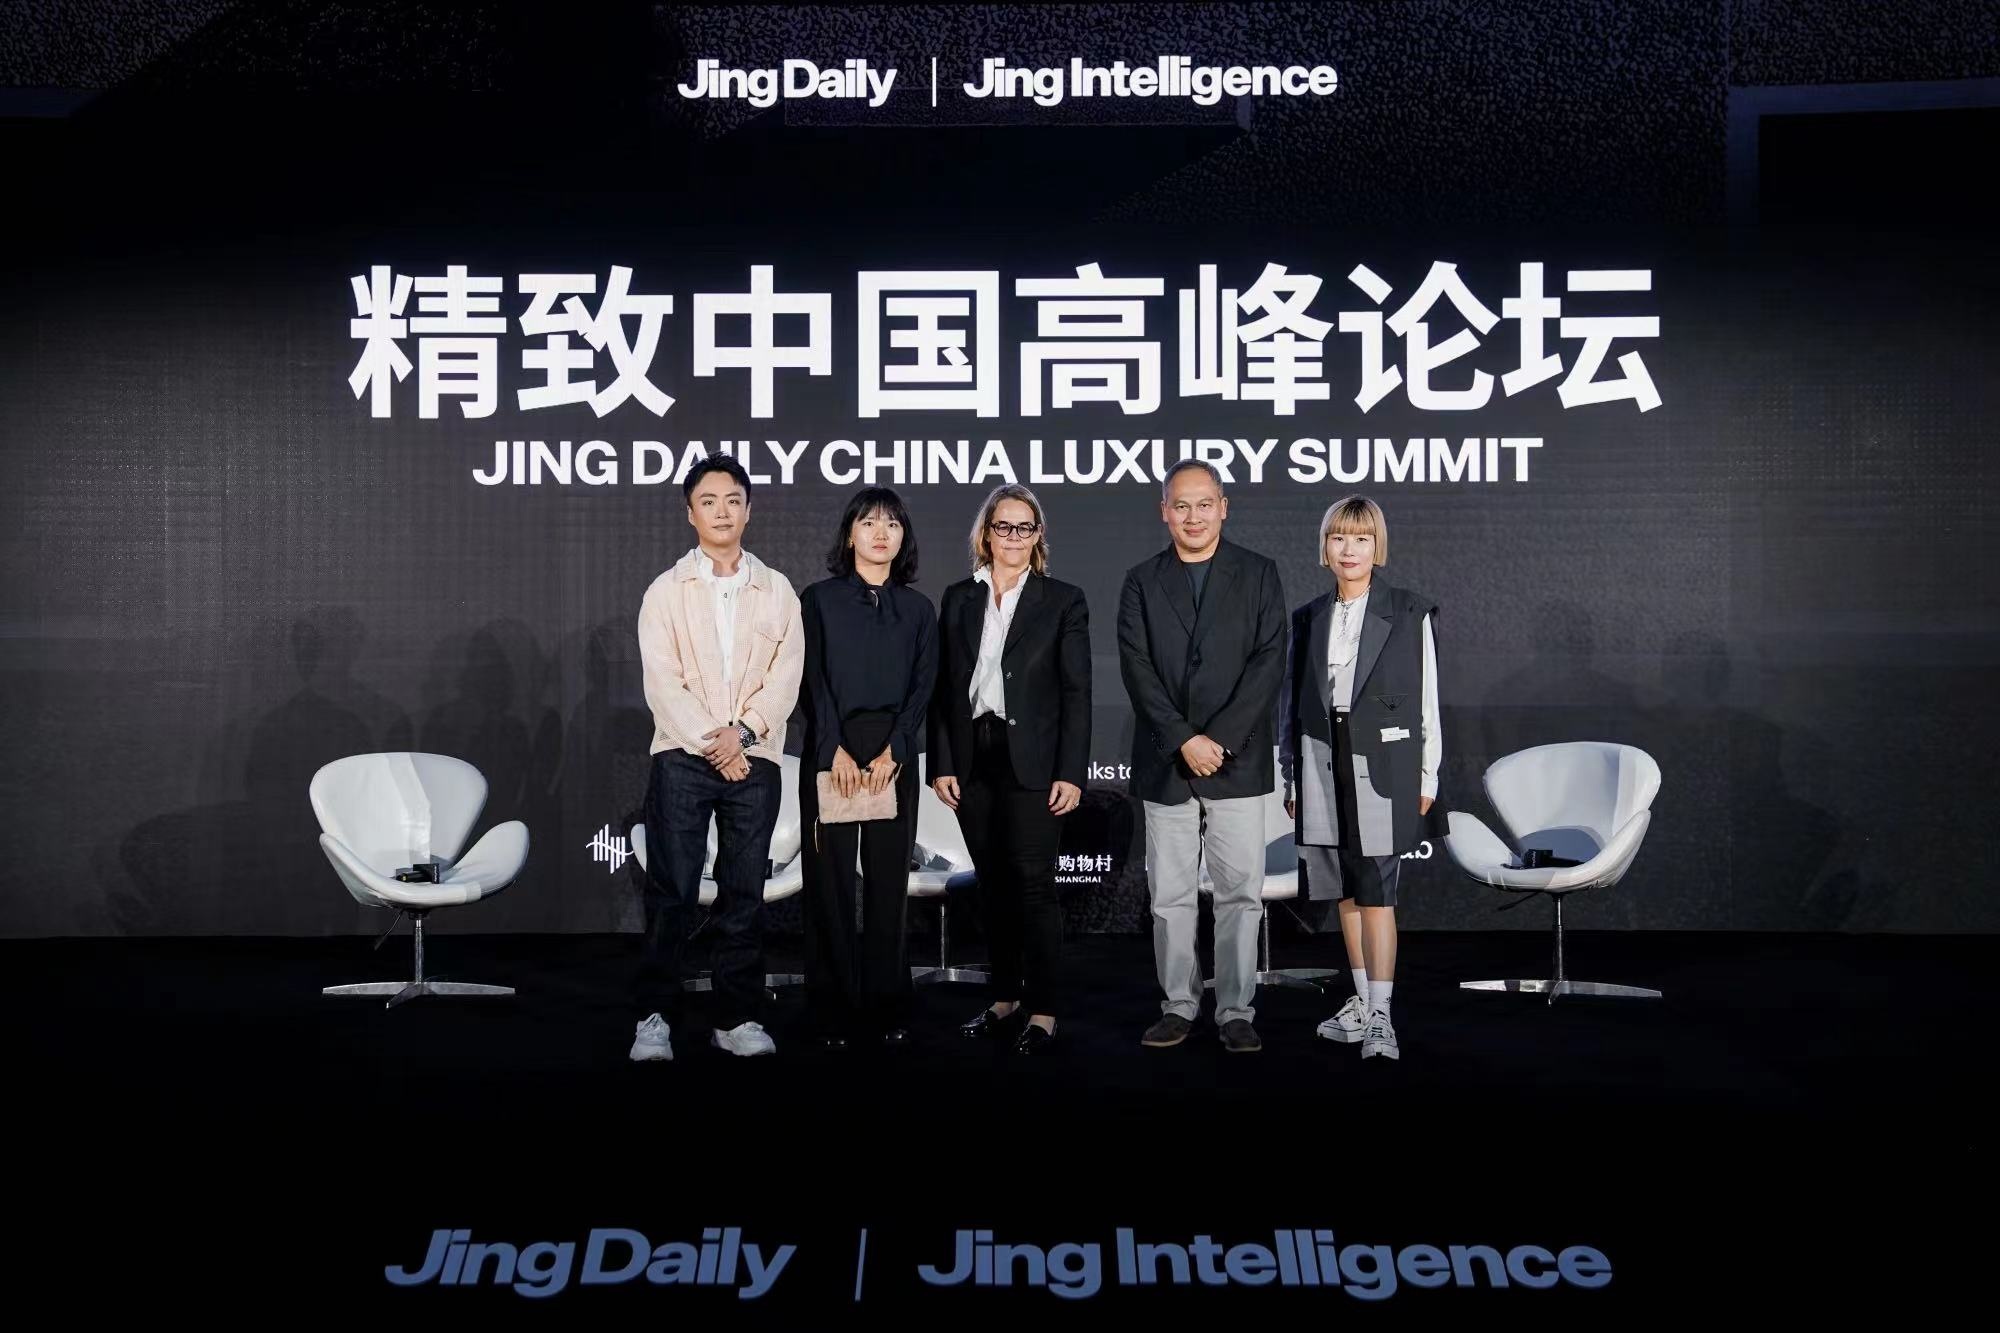 Image: Jing Daily